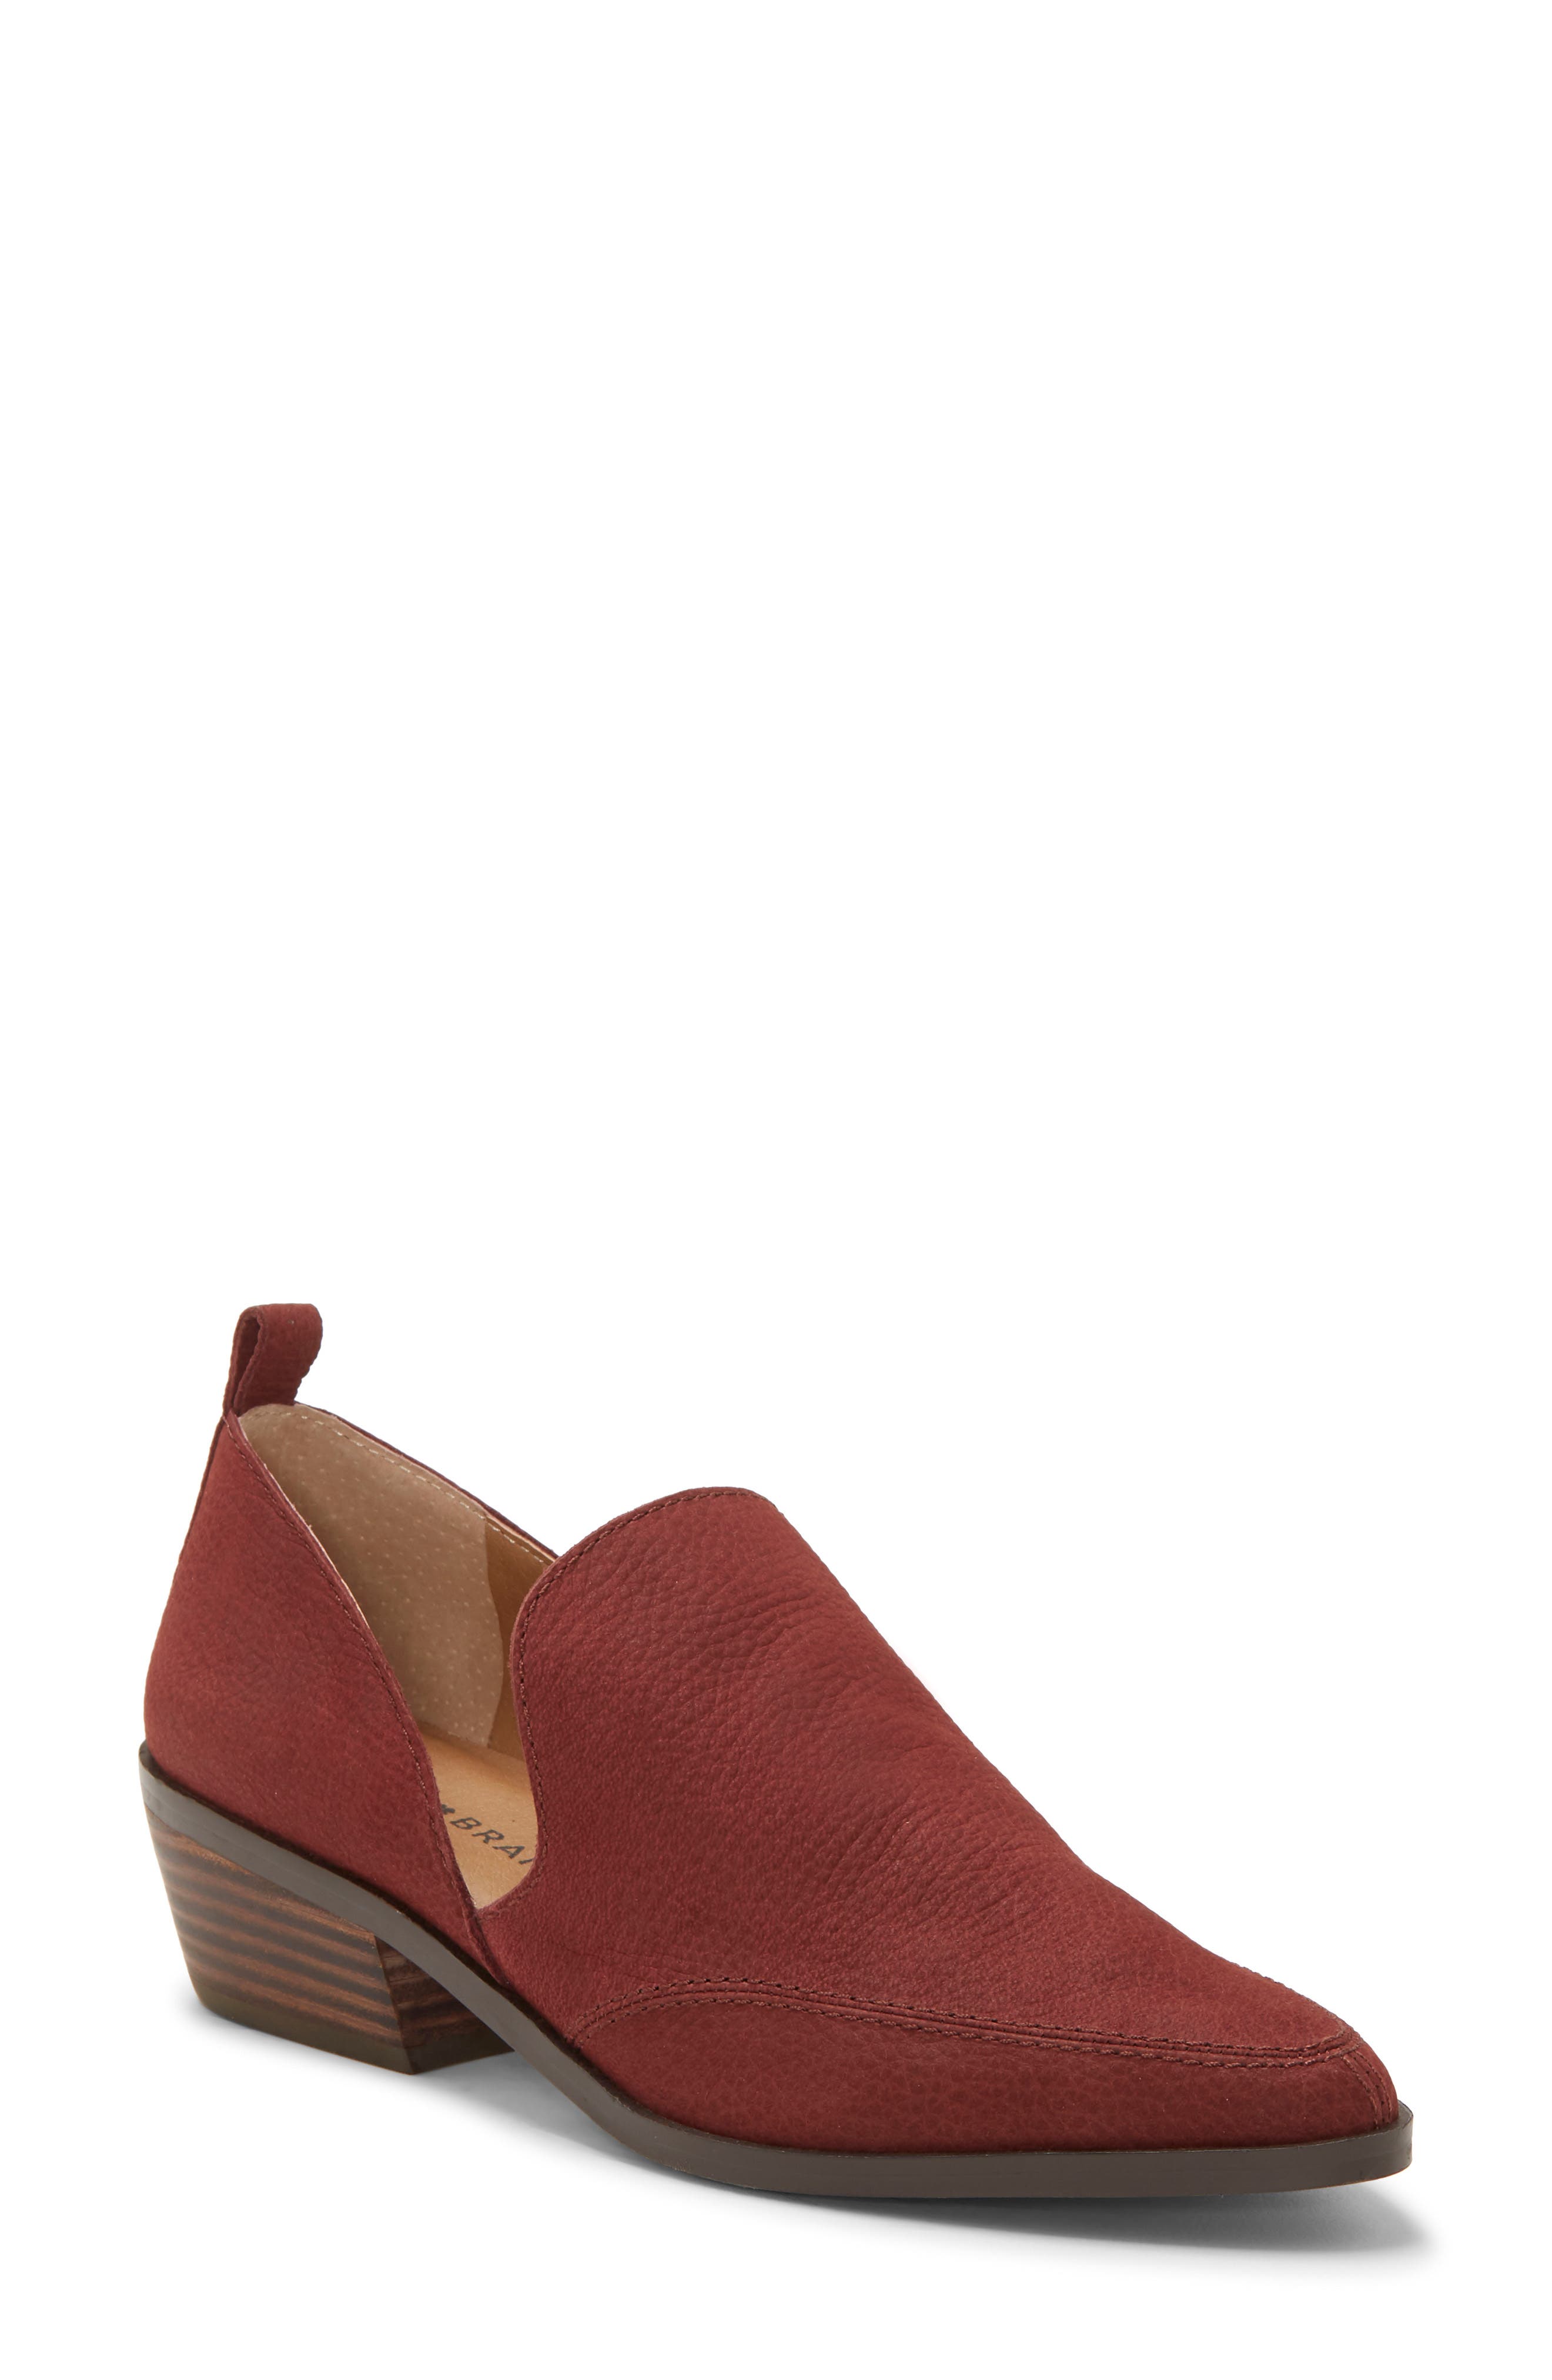 UPC 191644545665 product image for Women's Lucky Brand Mahzan Bootie, Size 8 M - Red | upcitemdb.com